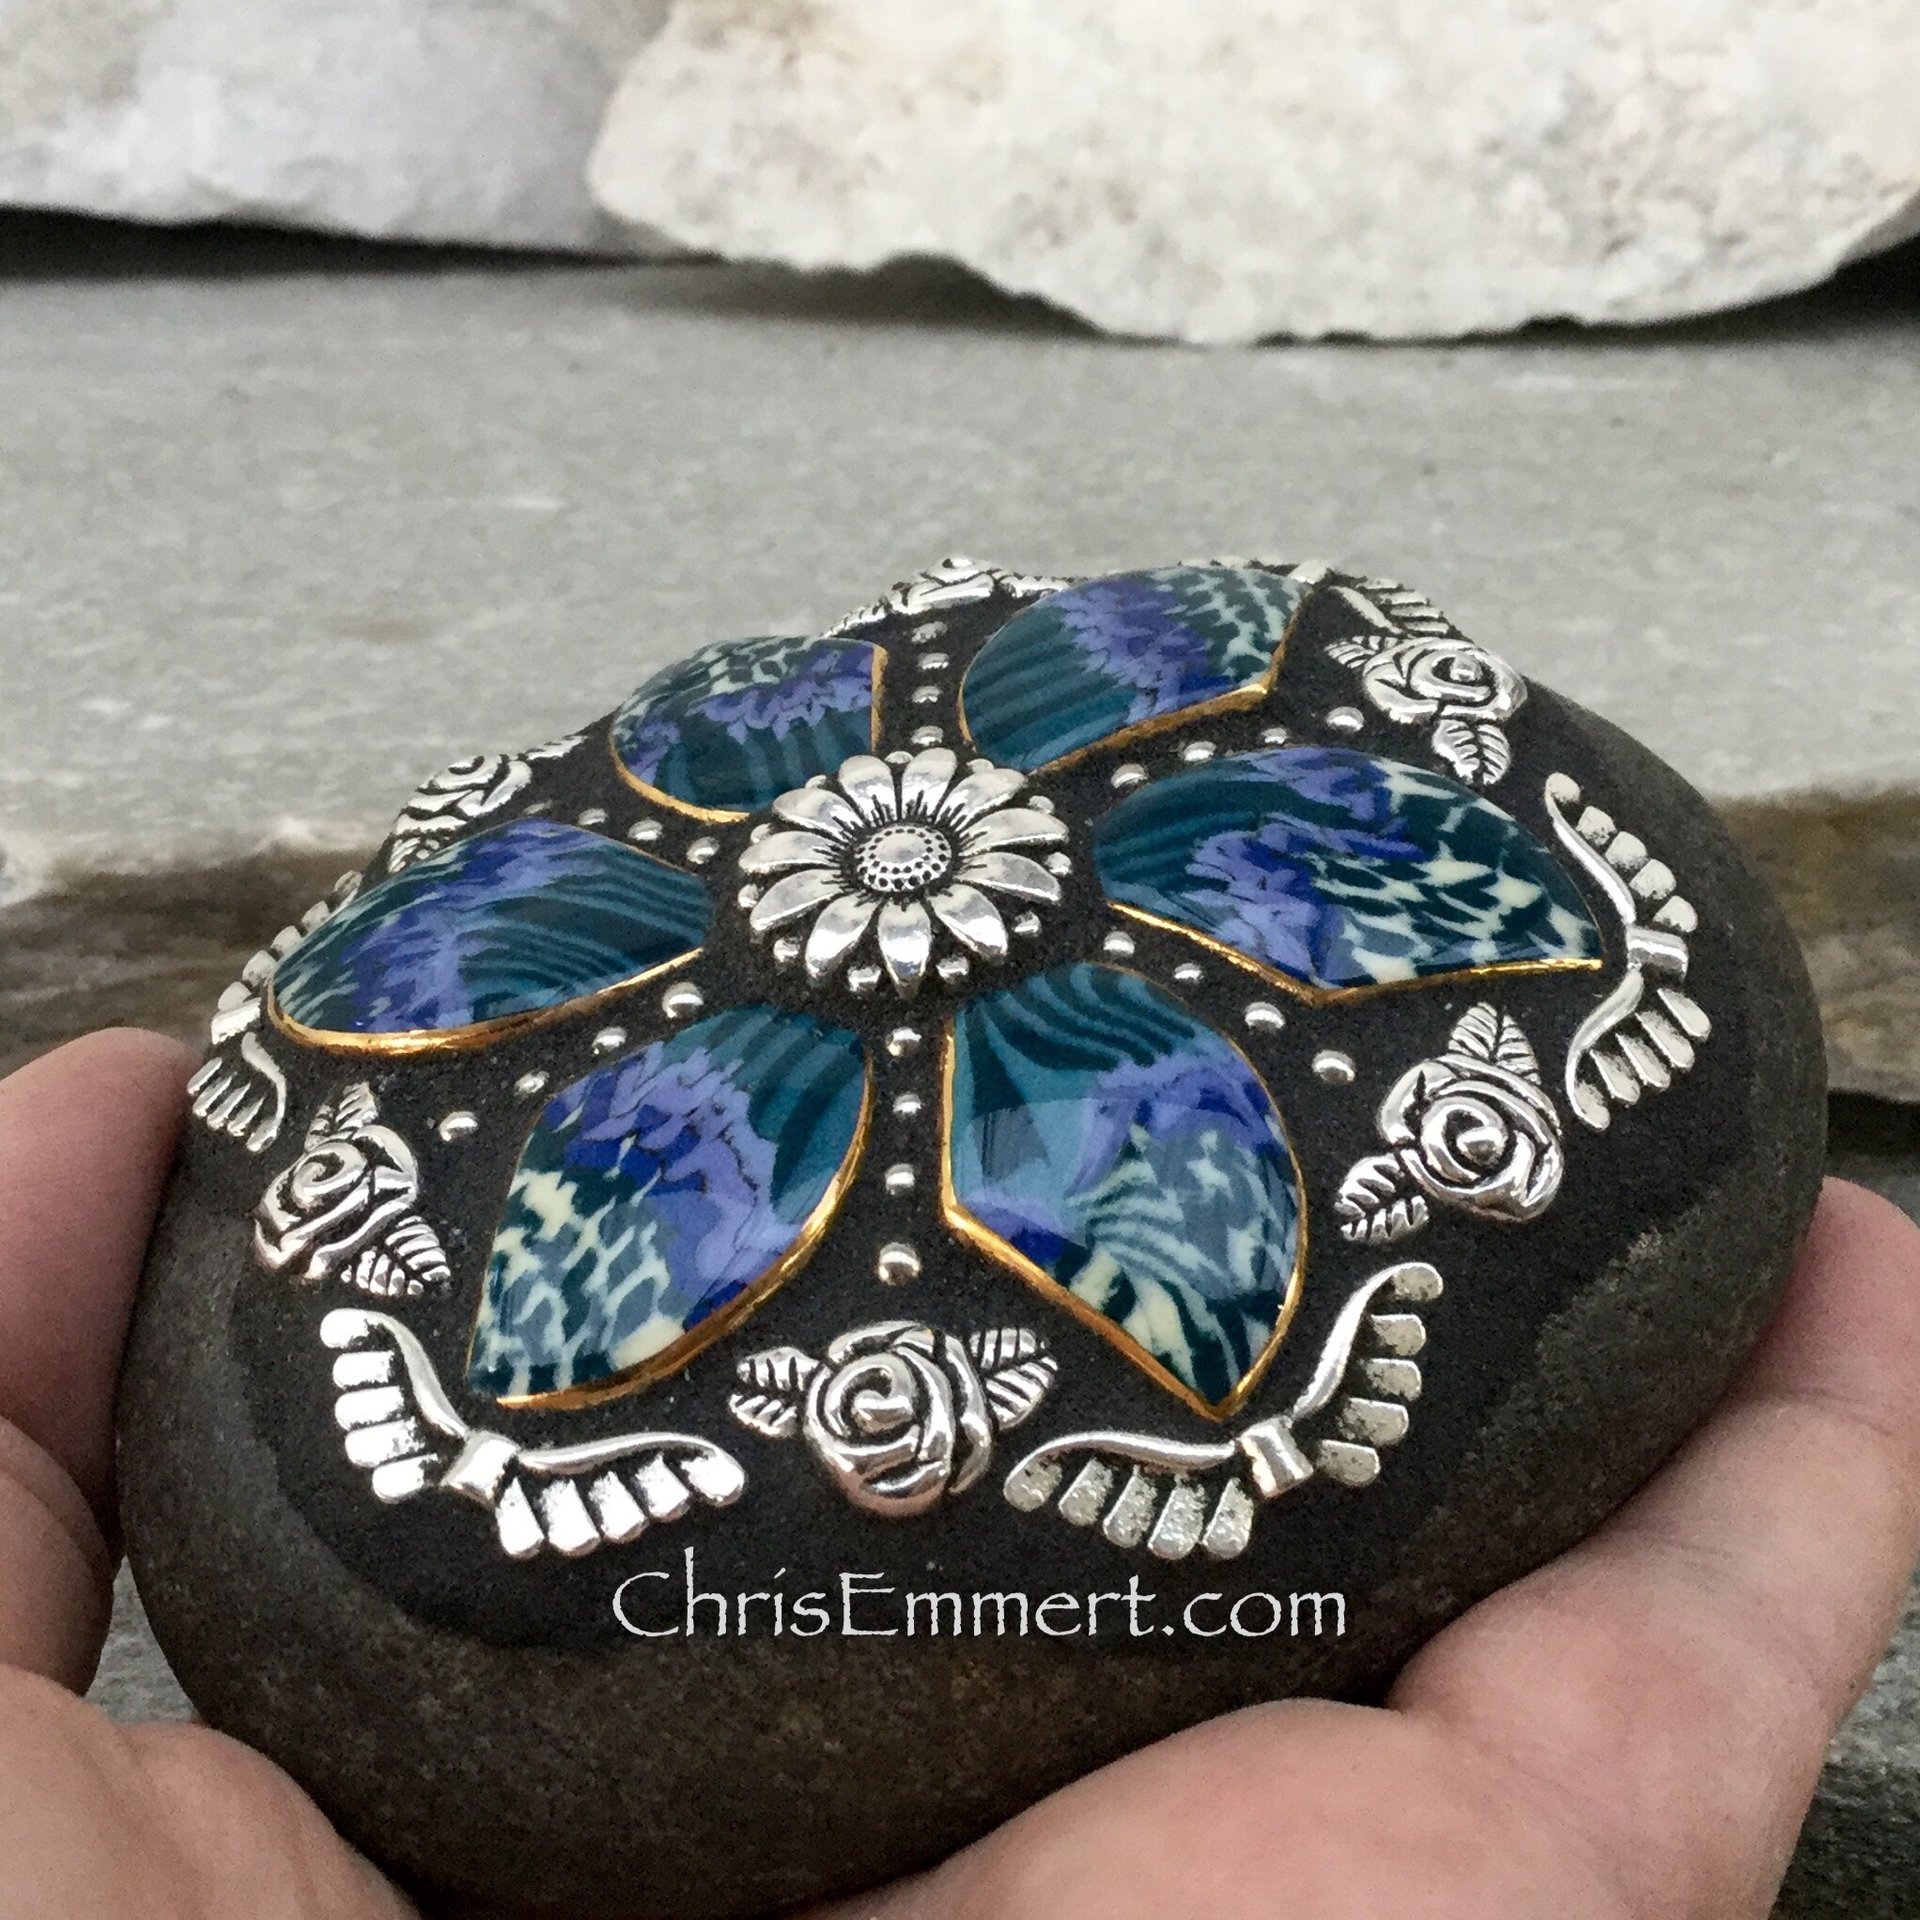 Teal 6 Petal Flower with Roses, Angel Wings, Mosaic Paperweight / Garden Stone